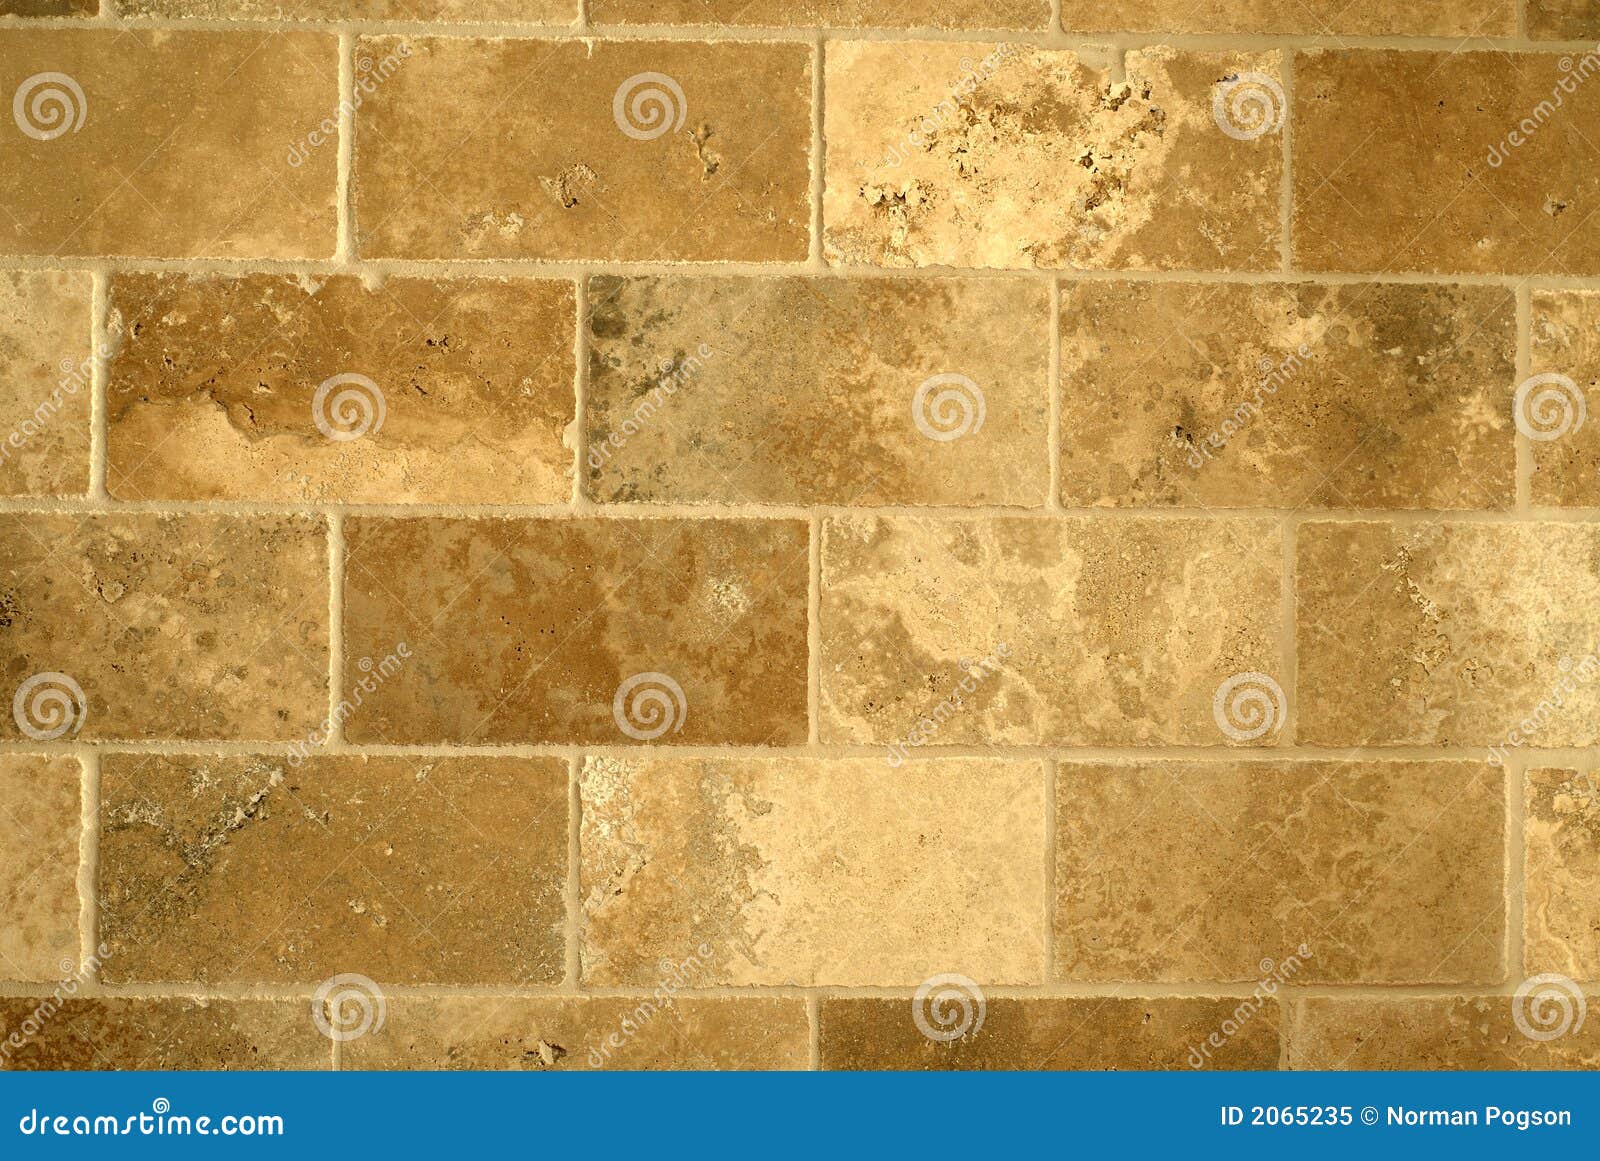 Marble Tile Background stock image. Image of scrapbook - 2065235